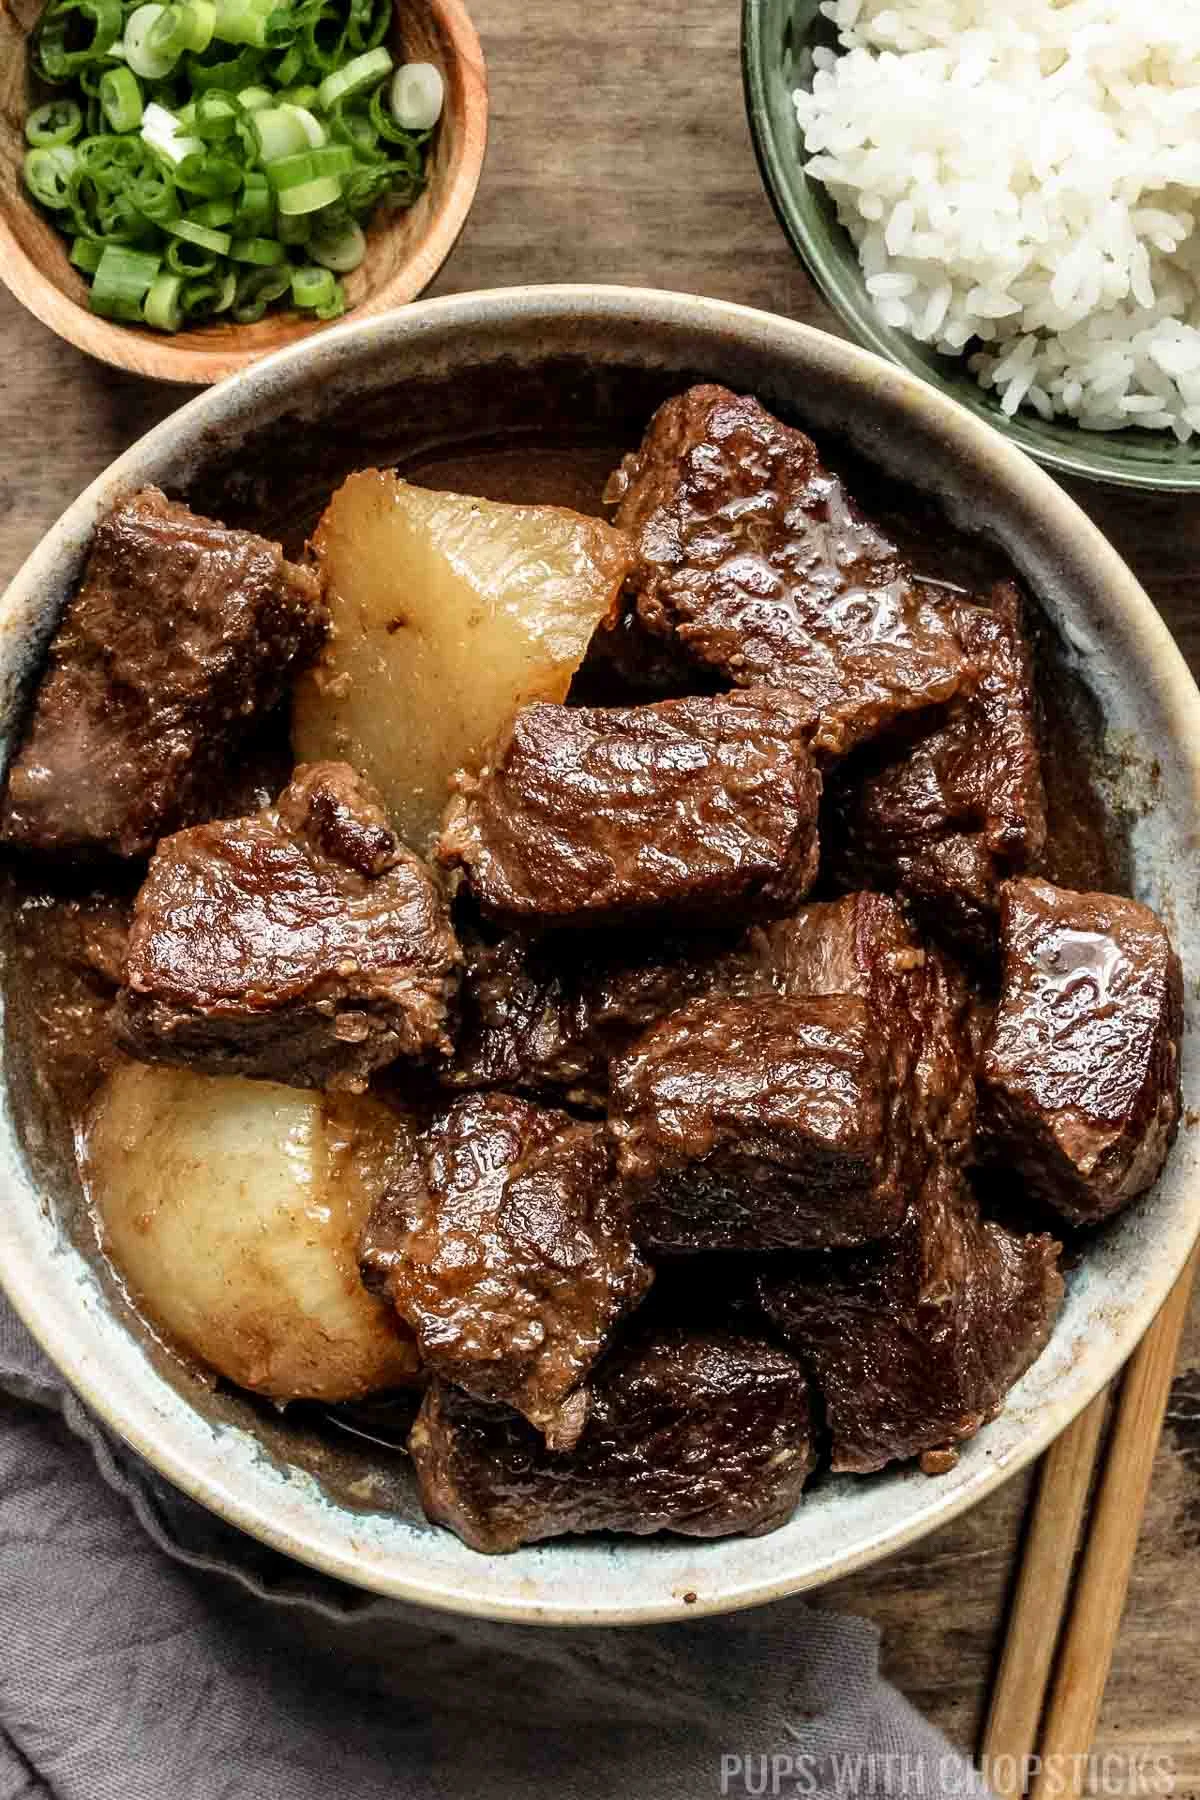 Chinese braised beef stew in a whilte bowl on a wooden table.